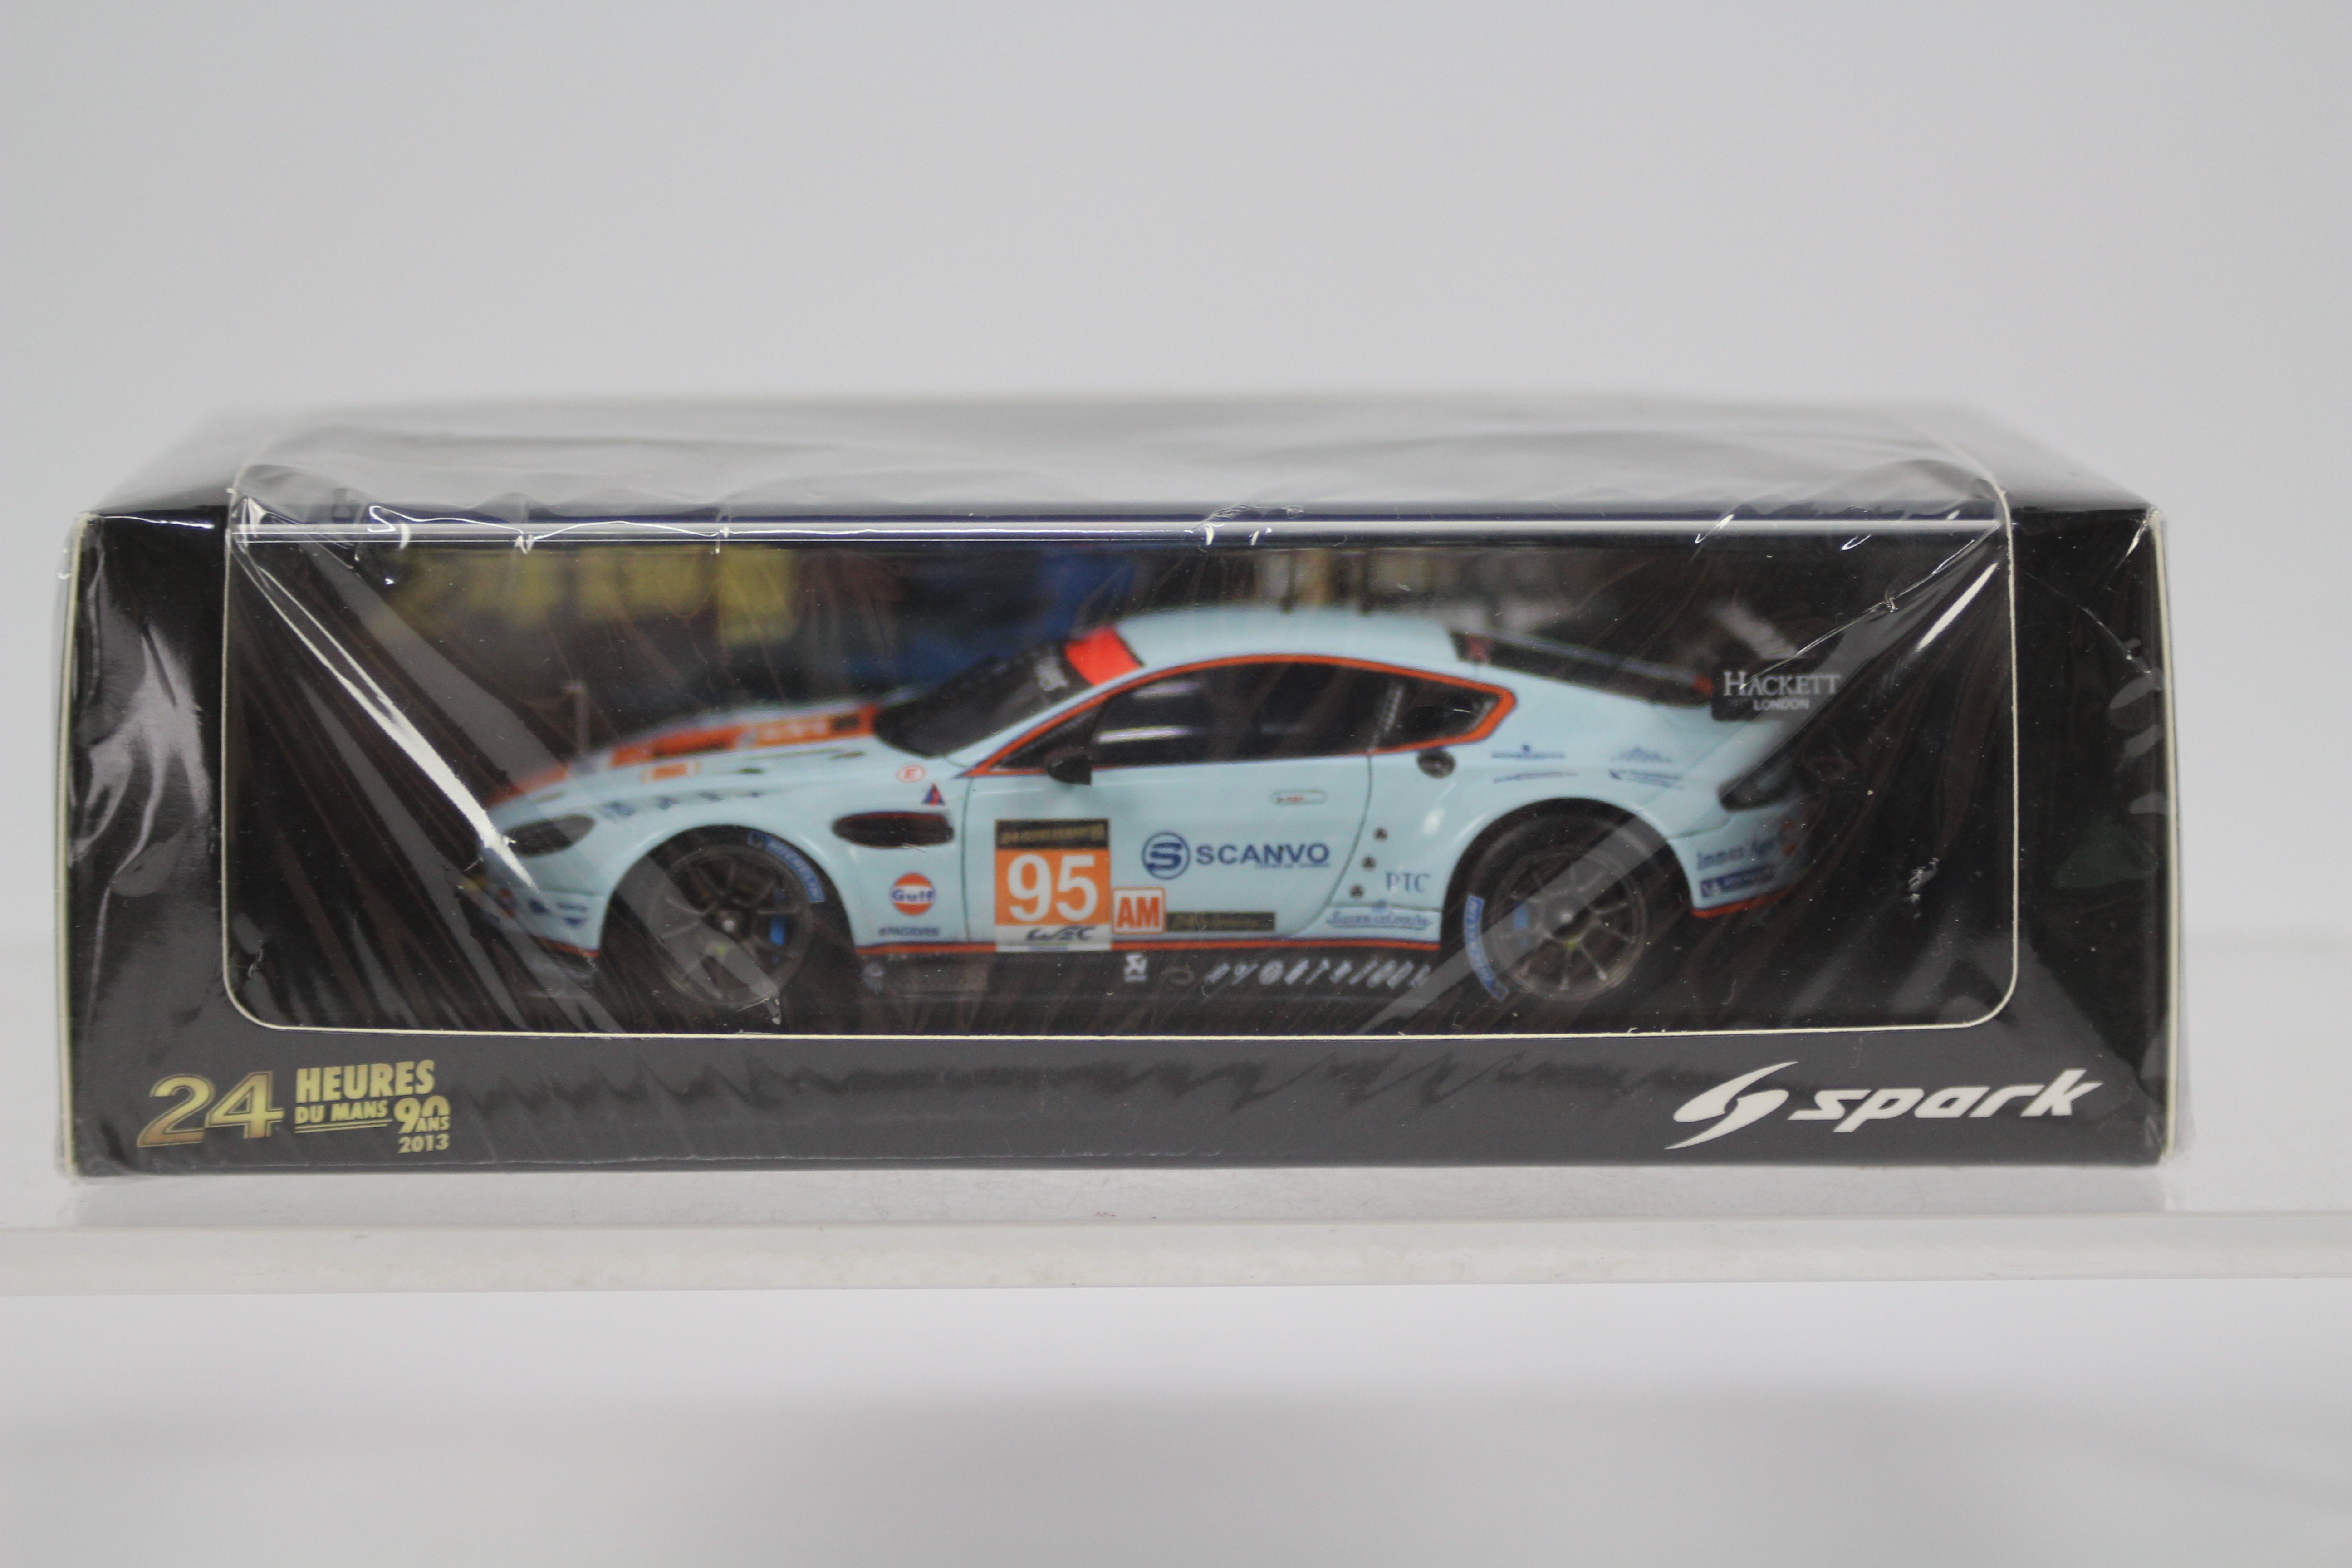 Spark - 2 x Aston Martin Vantage GTE AMR Gulf Racing cars from the 2013 Le Mans 24 Hour Race, - Image 3 of 4